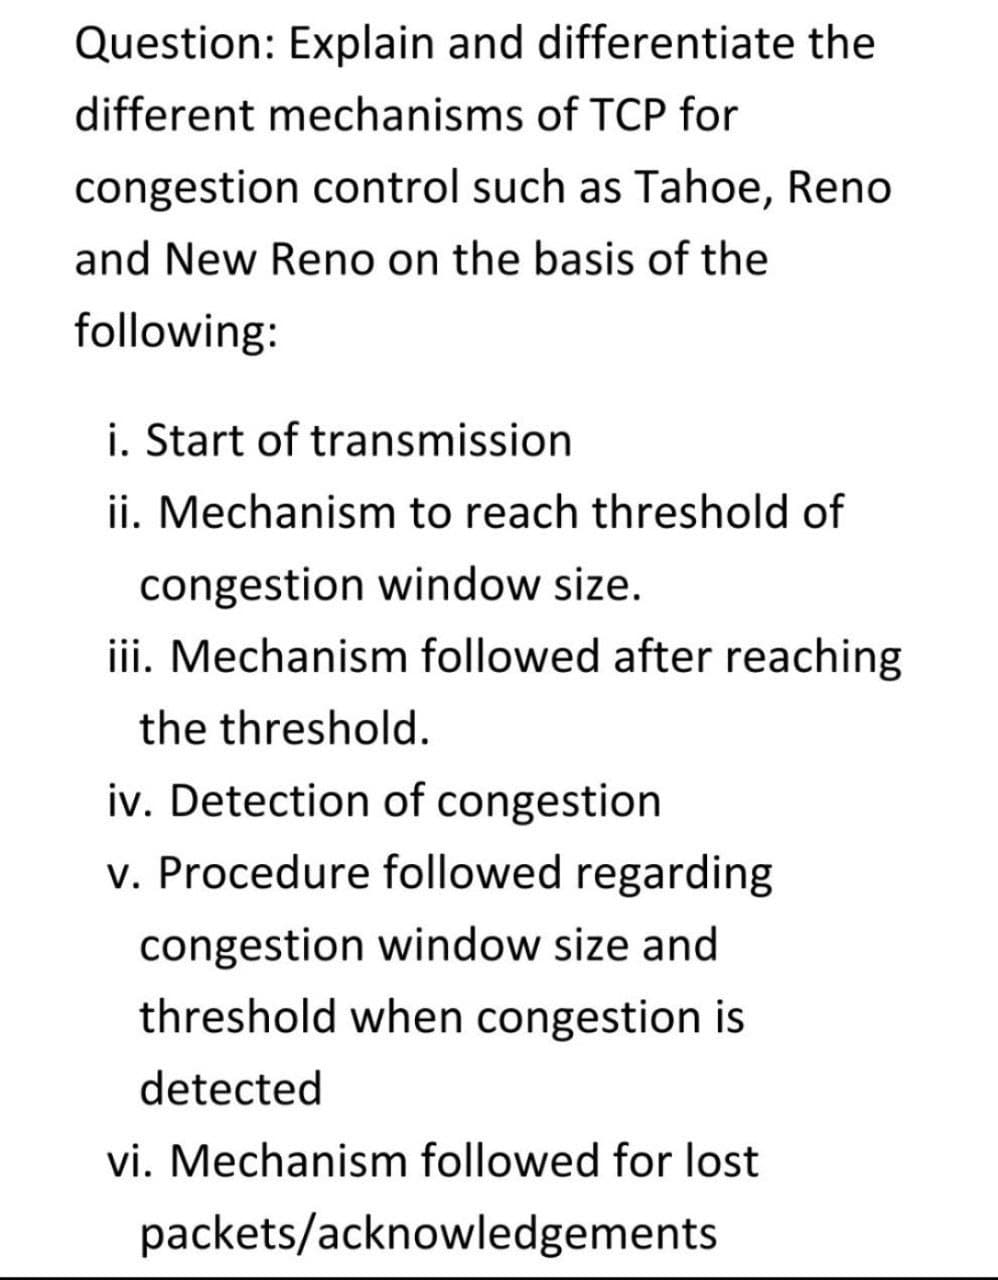 Question: Explain and differentiate the
different mechanisms of TCP for
congestion control such as Tahoe, Reno
and New Reno on the basis of the
following:
i. Start of transmission
ii. Mechanism to reach threshold of
congestion window size.
iii. Mechanism followed after reaching
the threshold.
iv. Detection of congestion
v. Procedure followed regarding
congestion window size and
threshold when congestion is
detected
vi. Mechanism followed for lost
packets/acknowledgements
